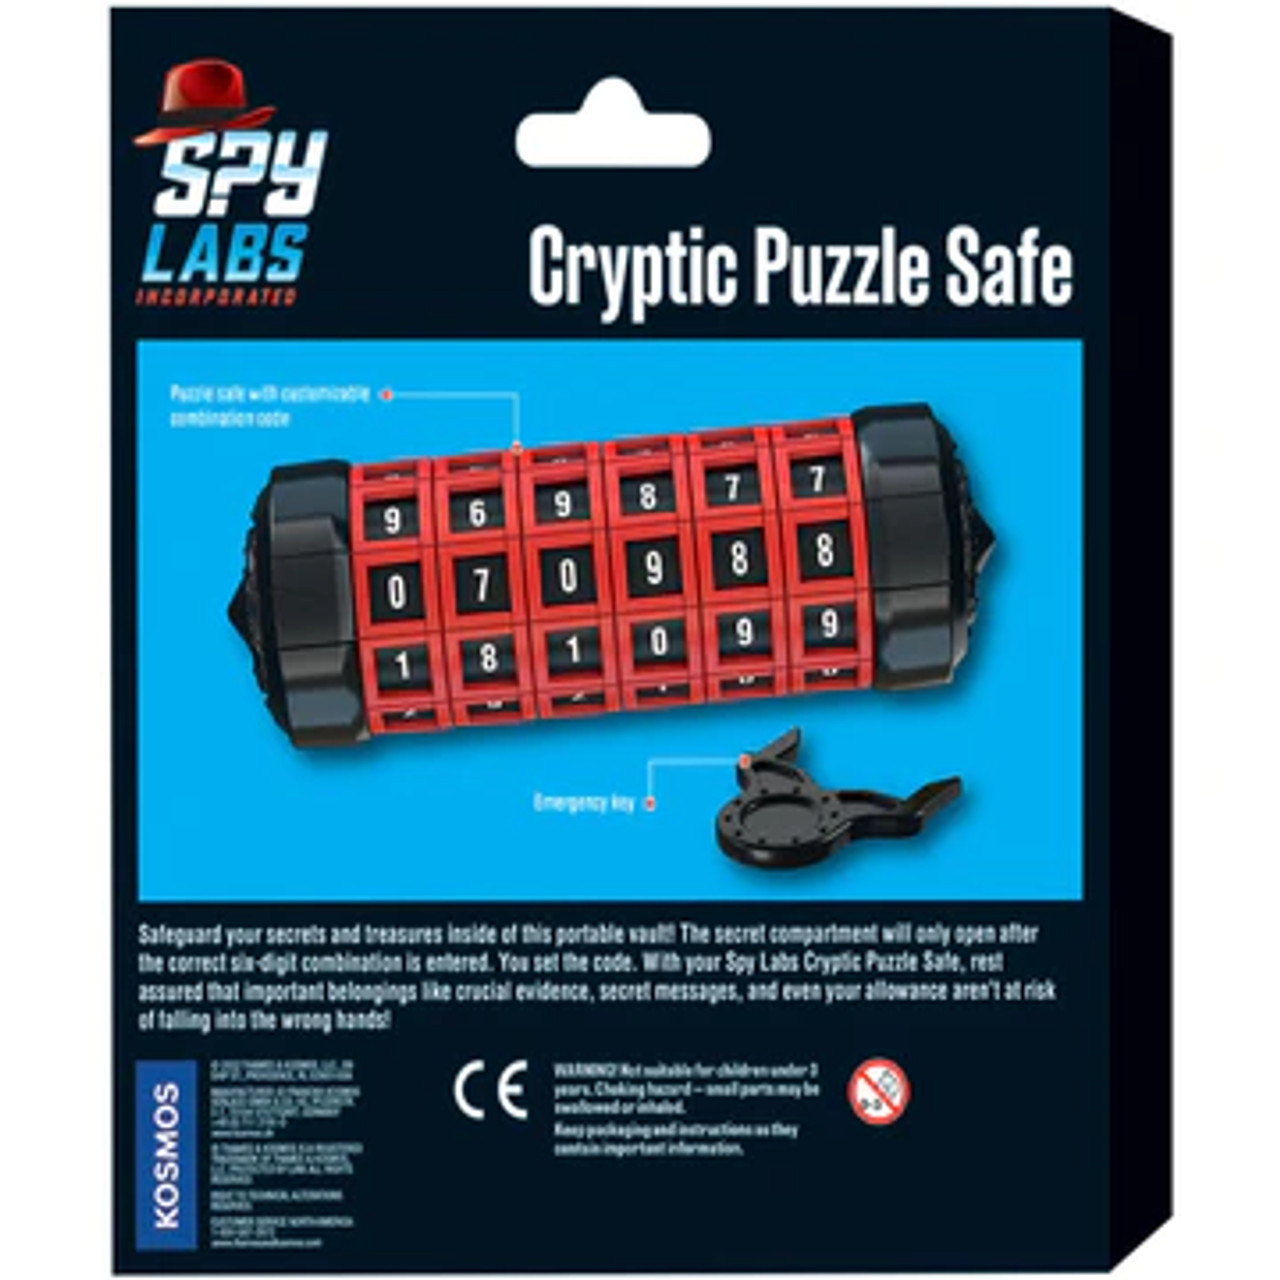 Cryptic Puzzle Safe